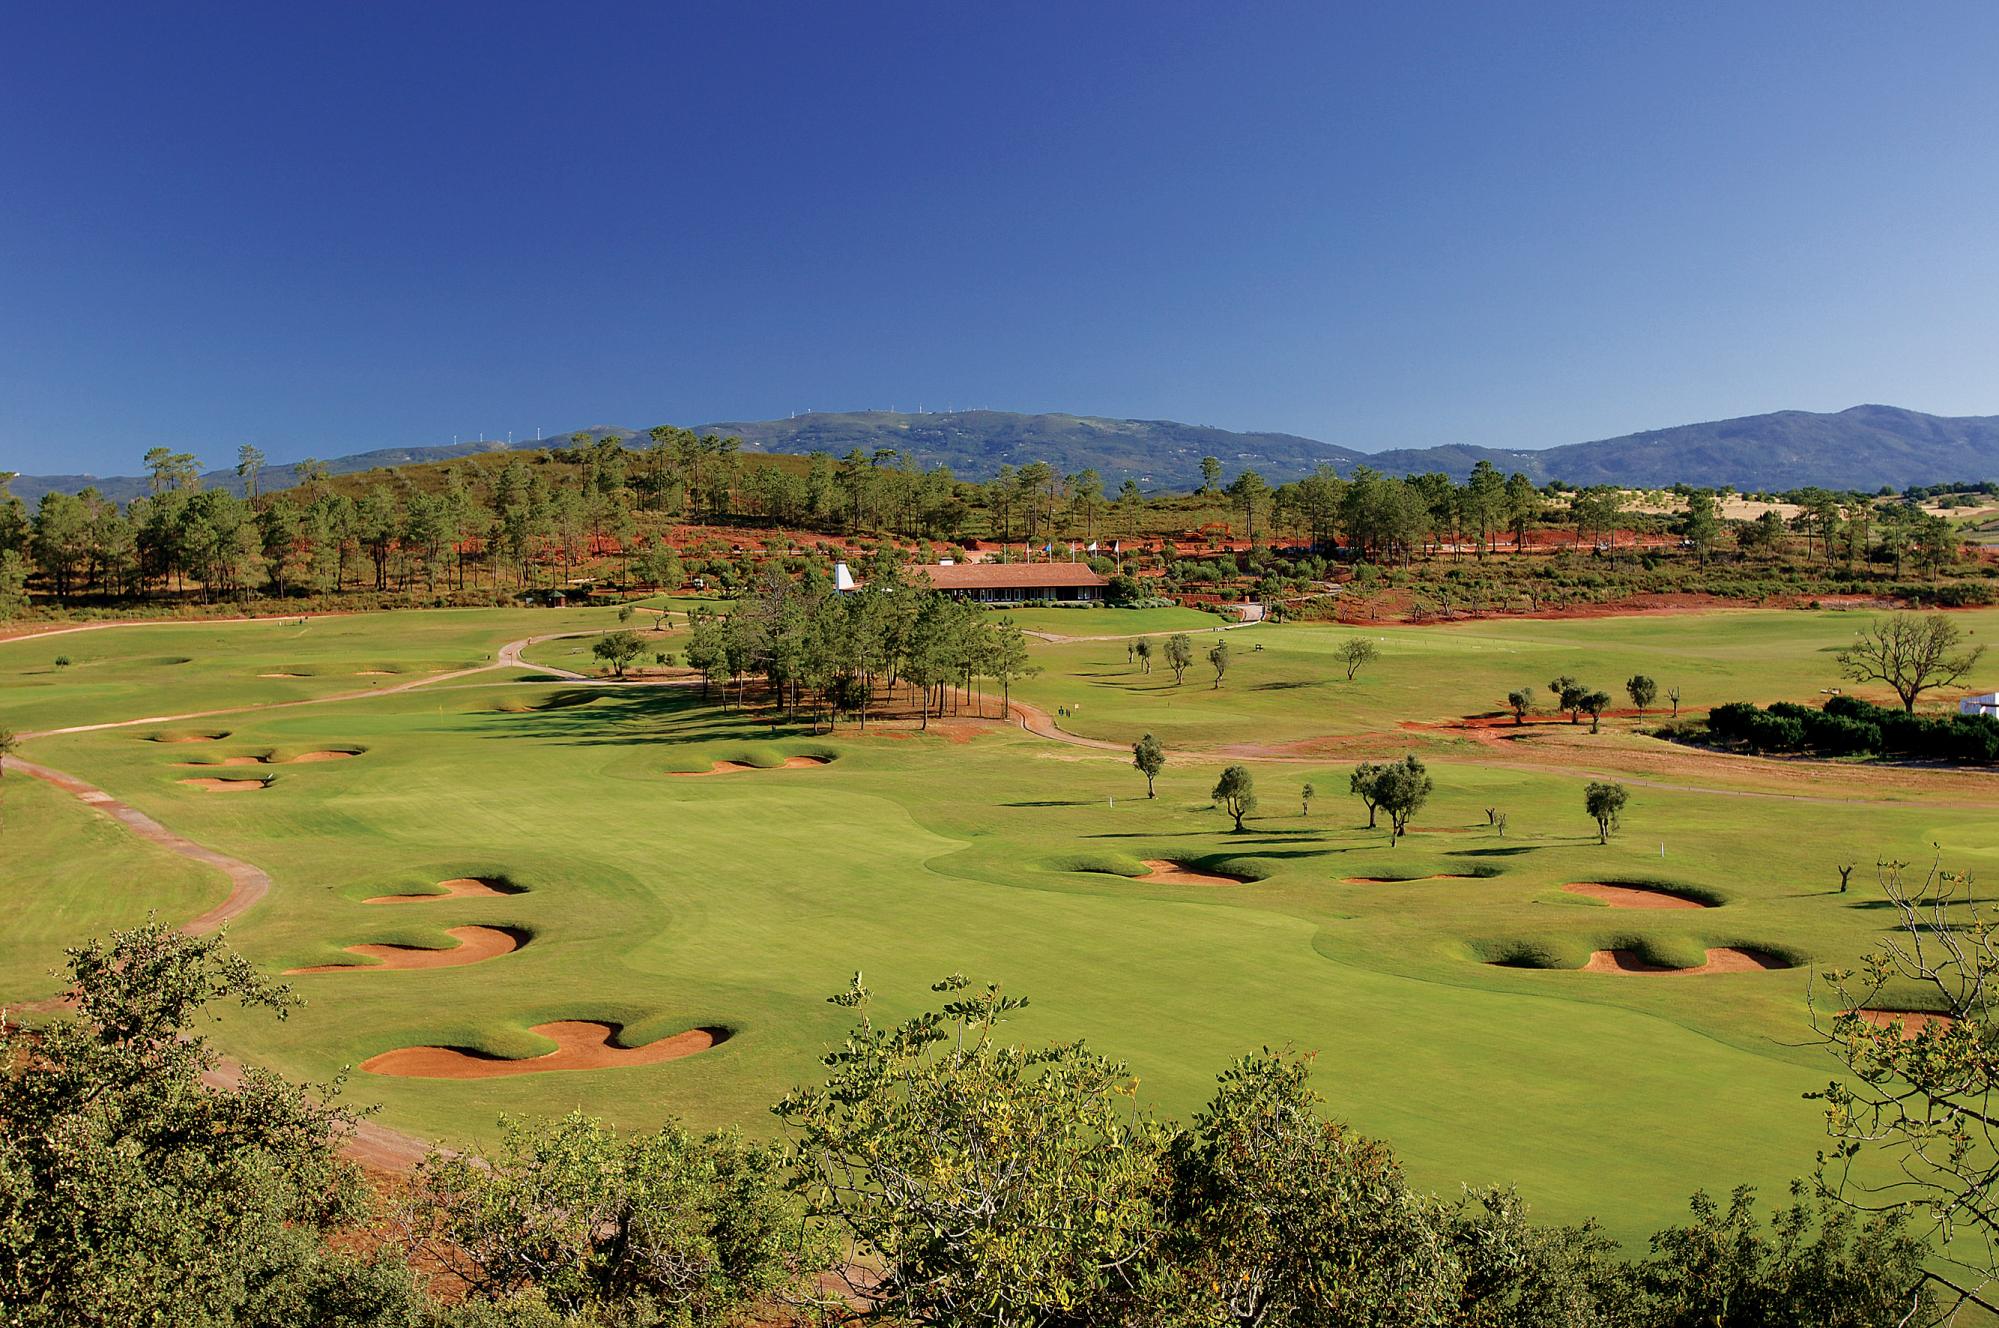 Morgado Golf Course consists of several of the most excellent golf course within Algarve